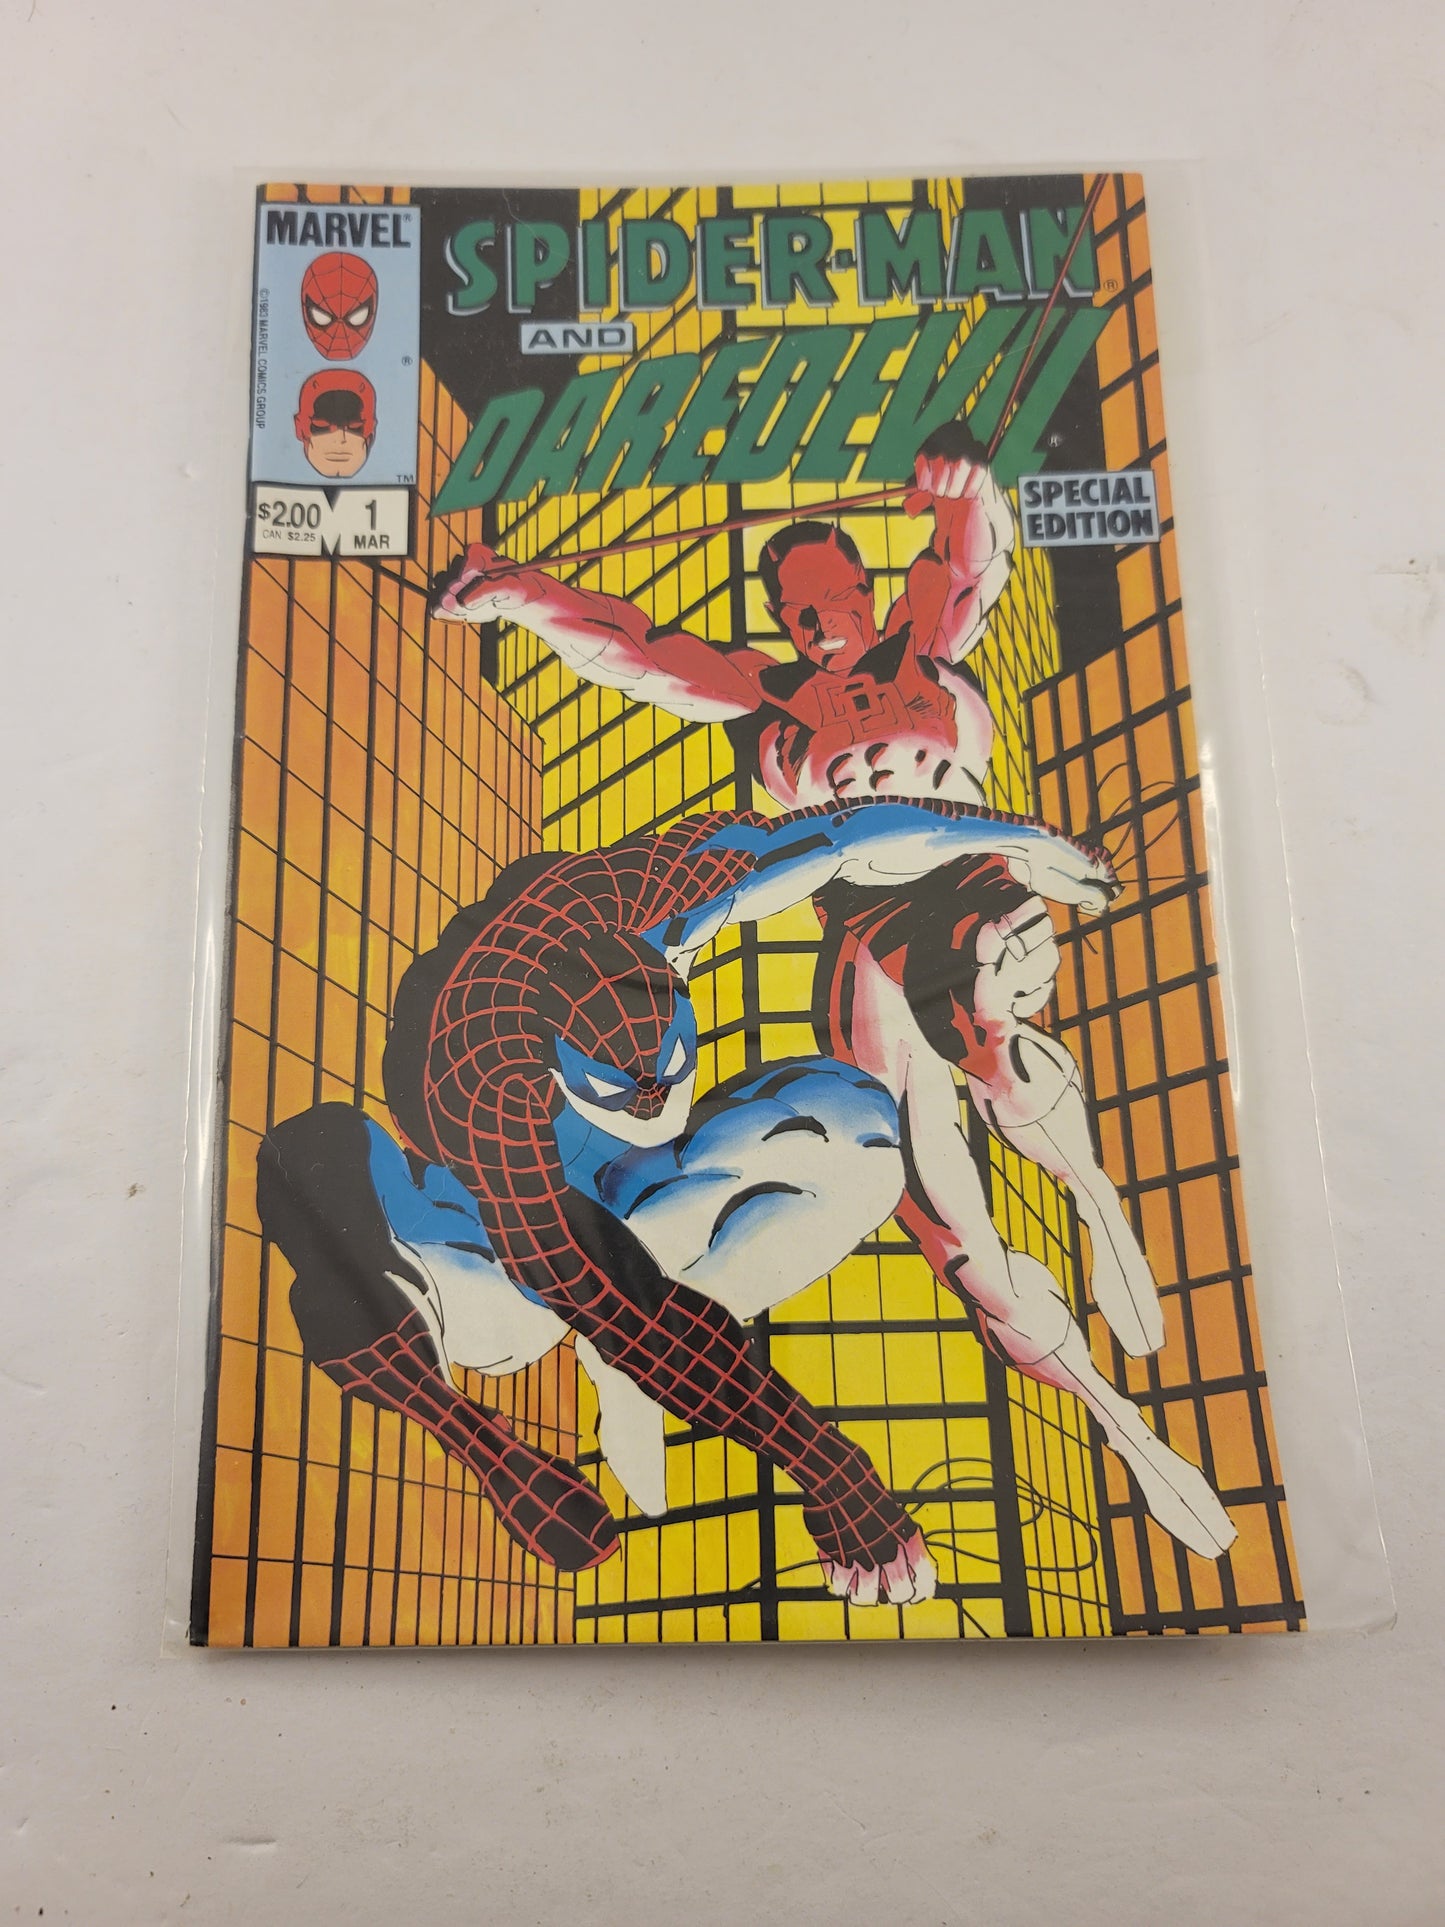 Spider-Man and Daredevil One Shot Issue 1 (March 1984) Marvel Comics